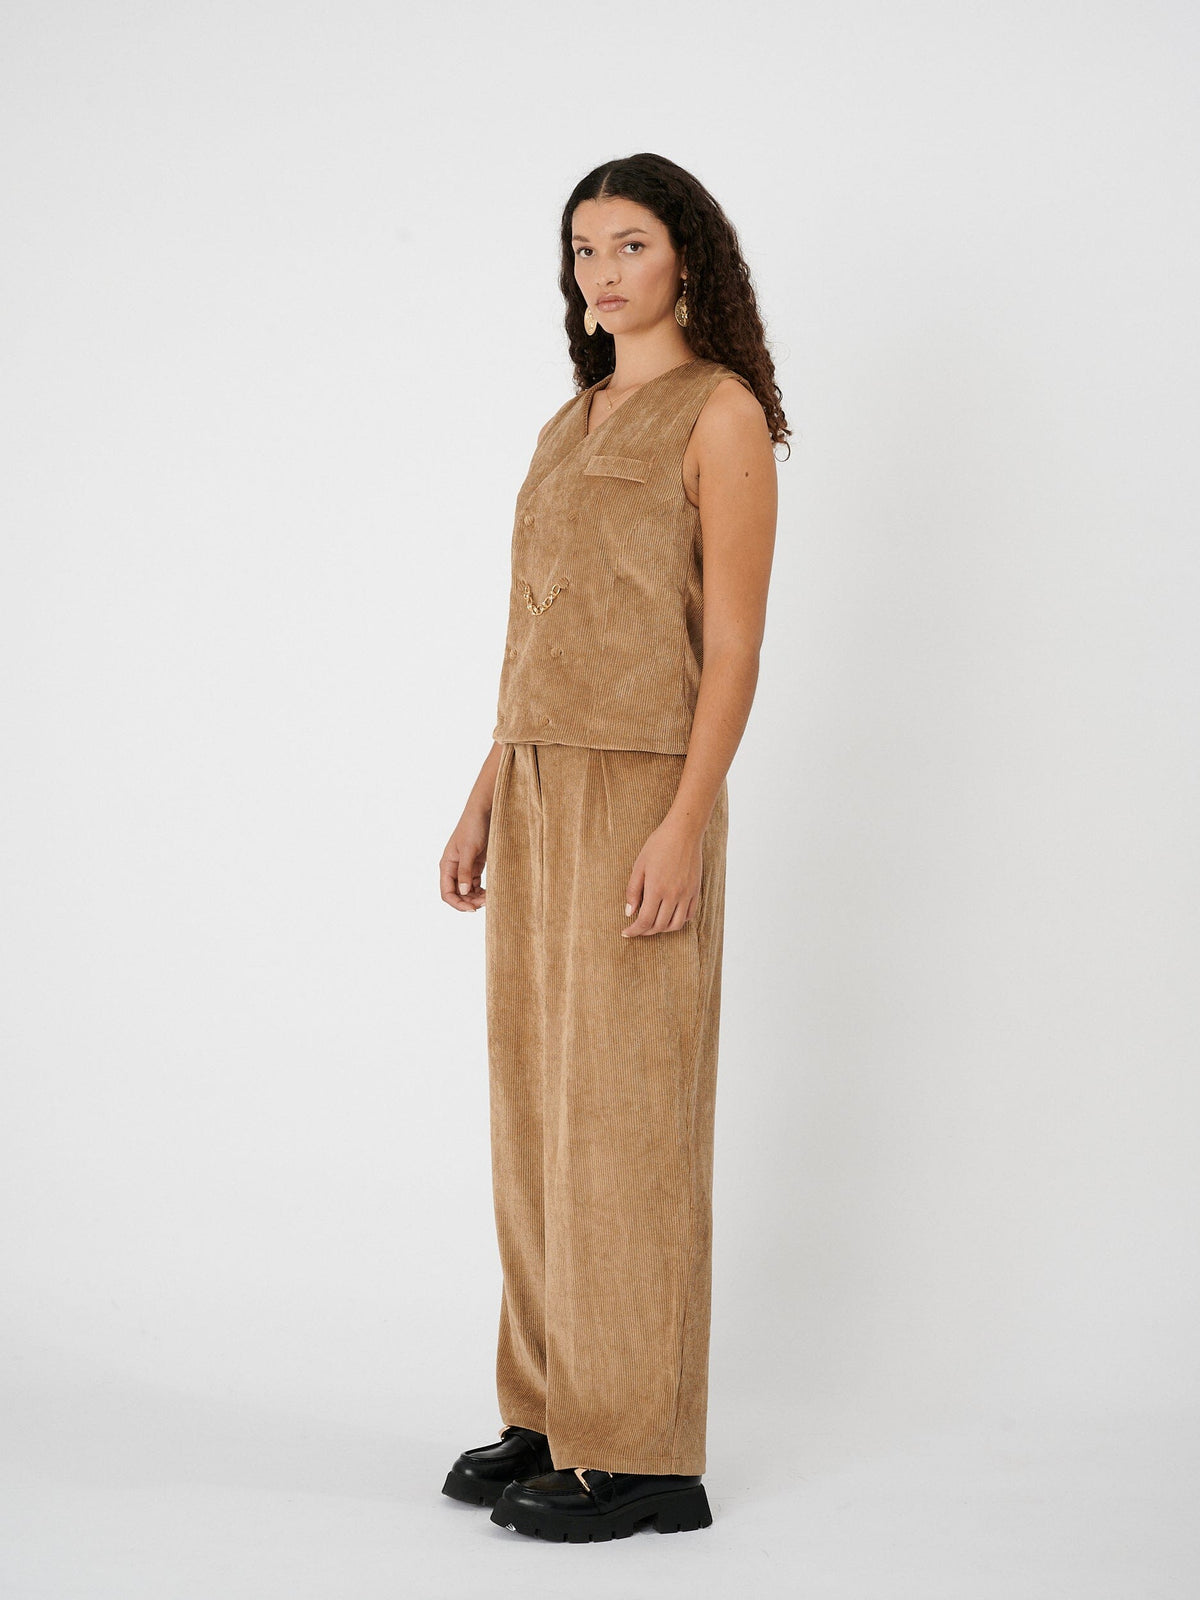 GILBERT - Beige corduroy high-waisted pants with darts Trousers Fête Impériale